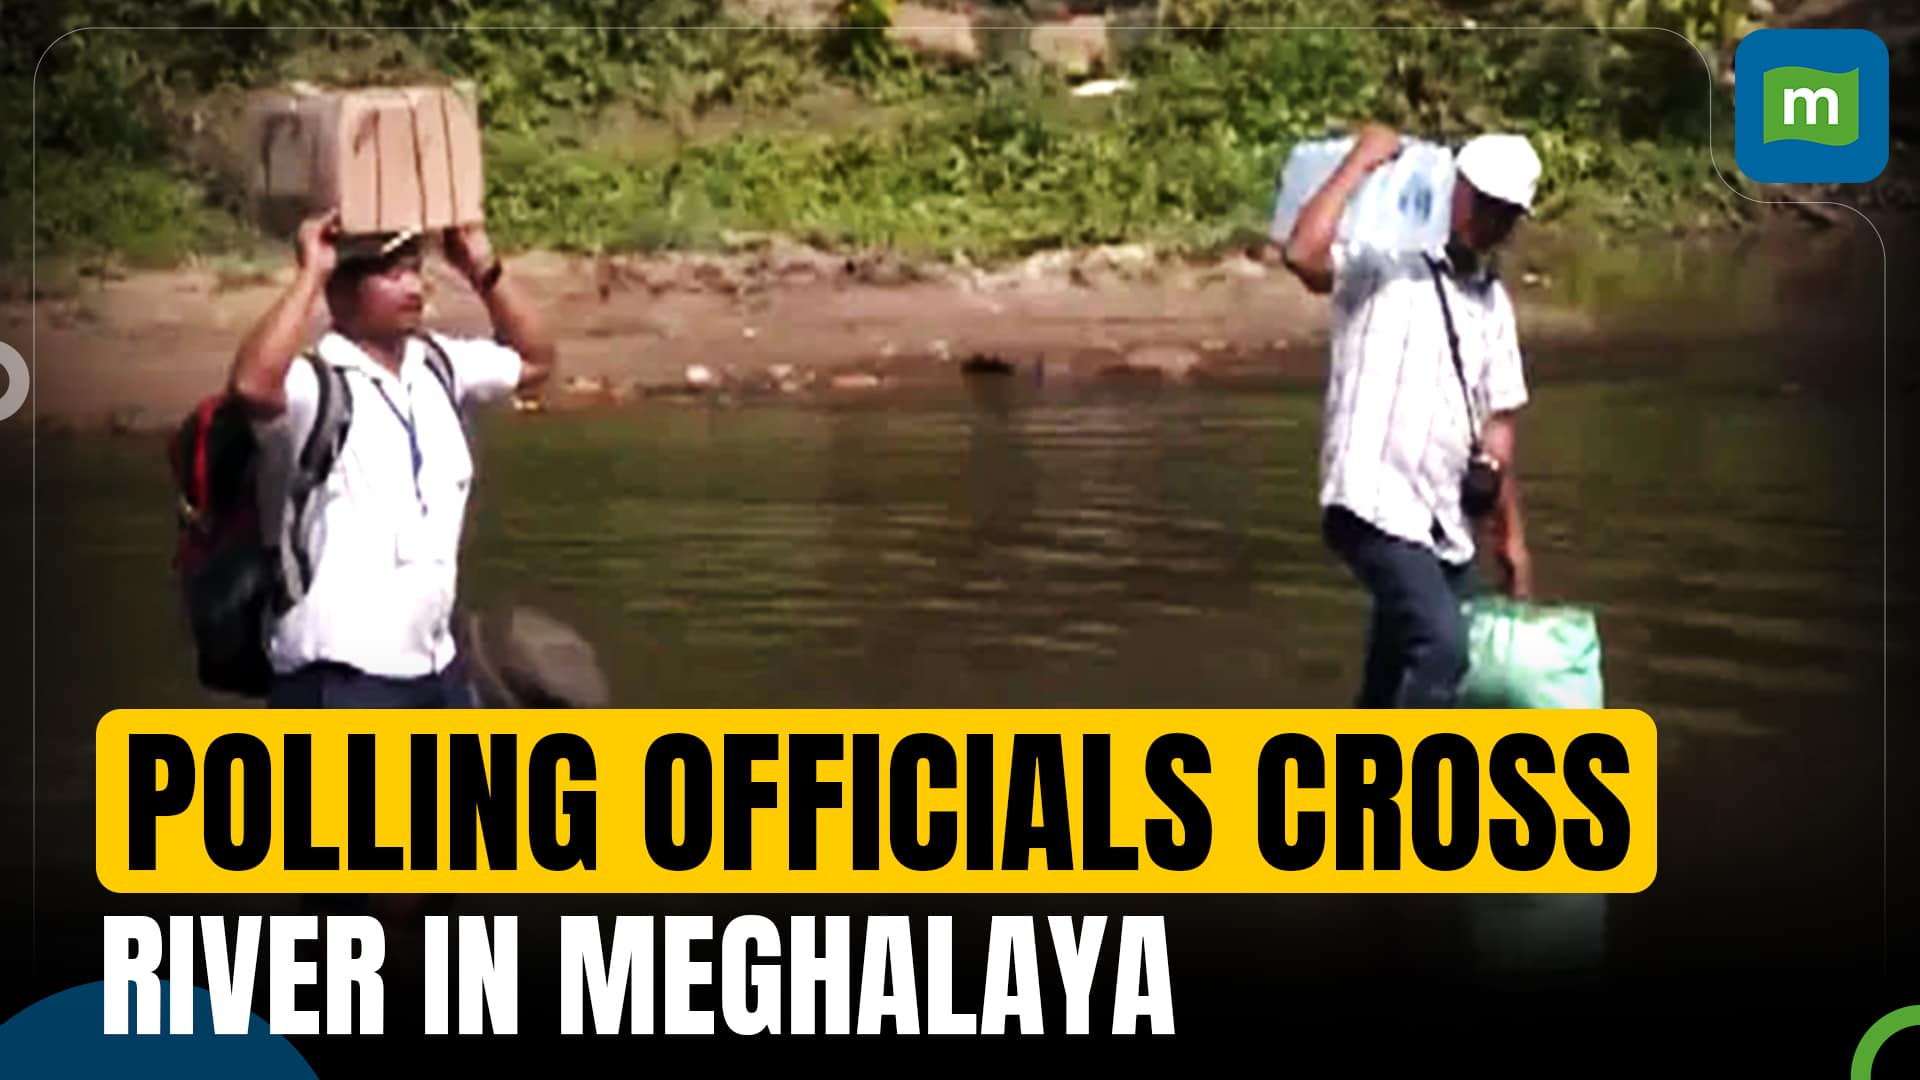 Polling officials cross river on foot in Meghalaya's Nengsra